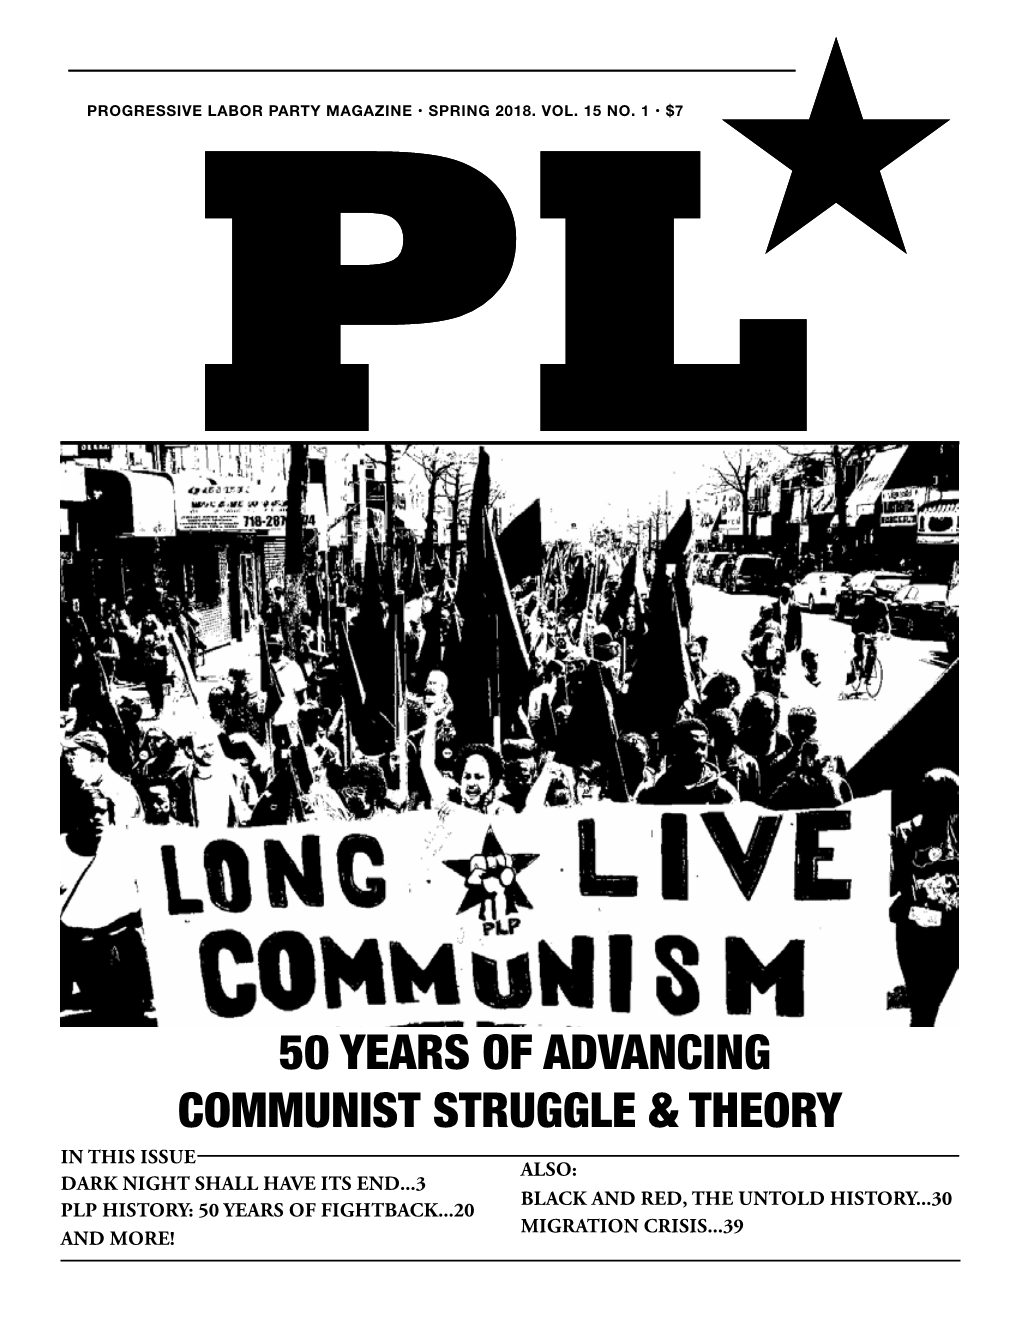 50 Years of Advancing Communist Struggle & Theory